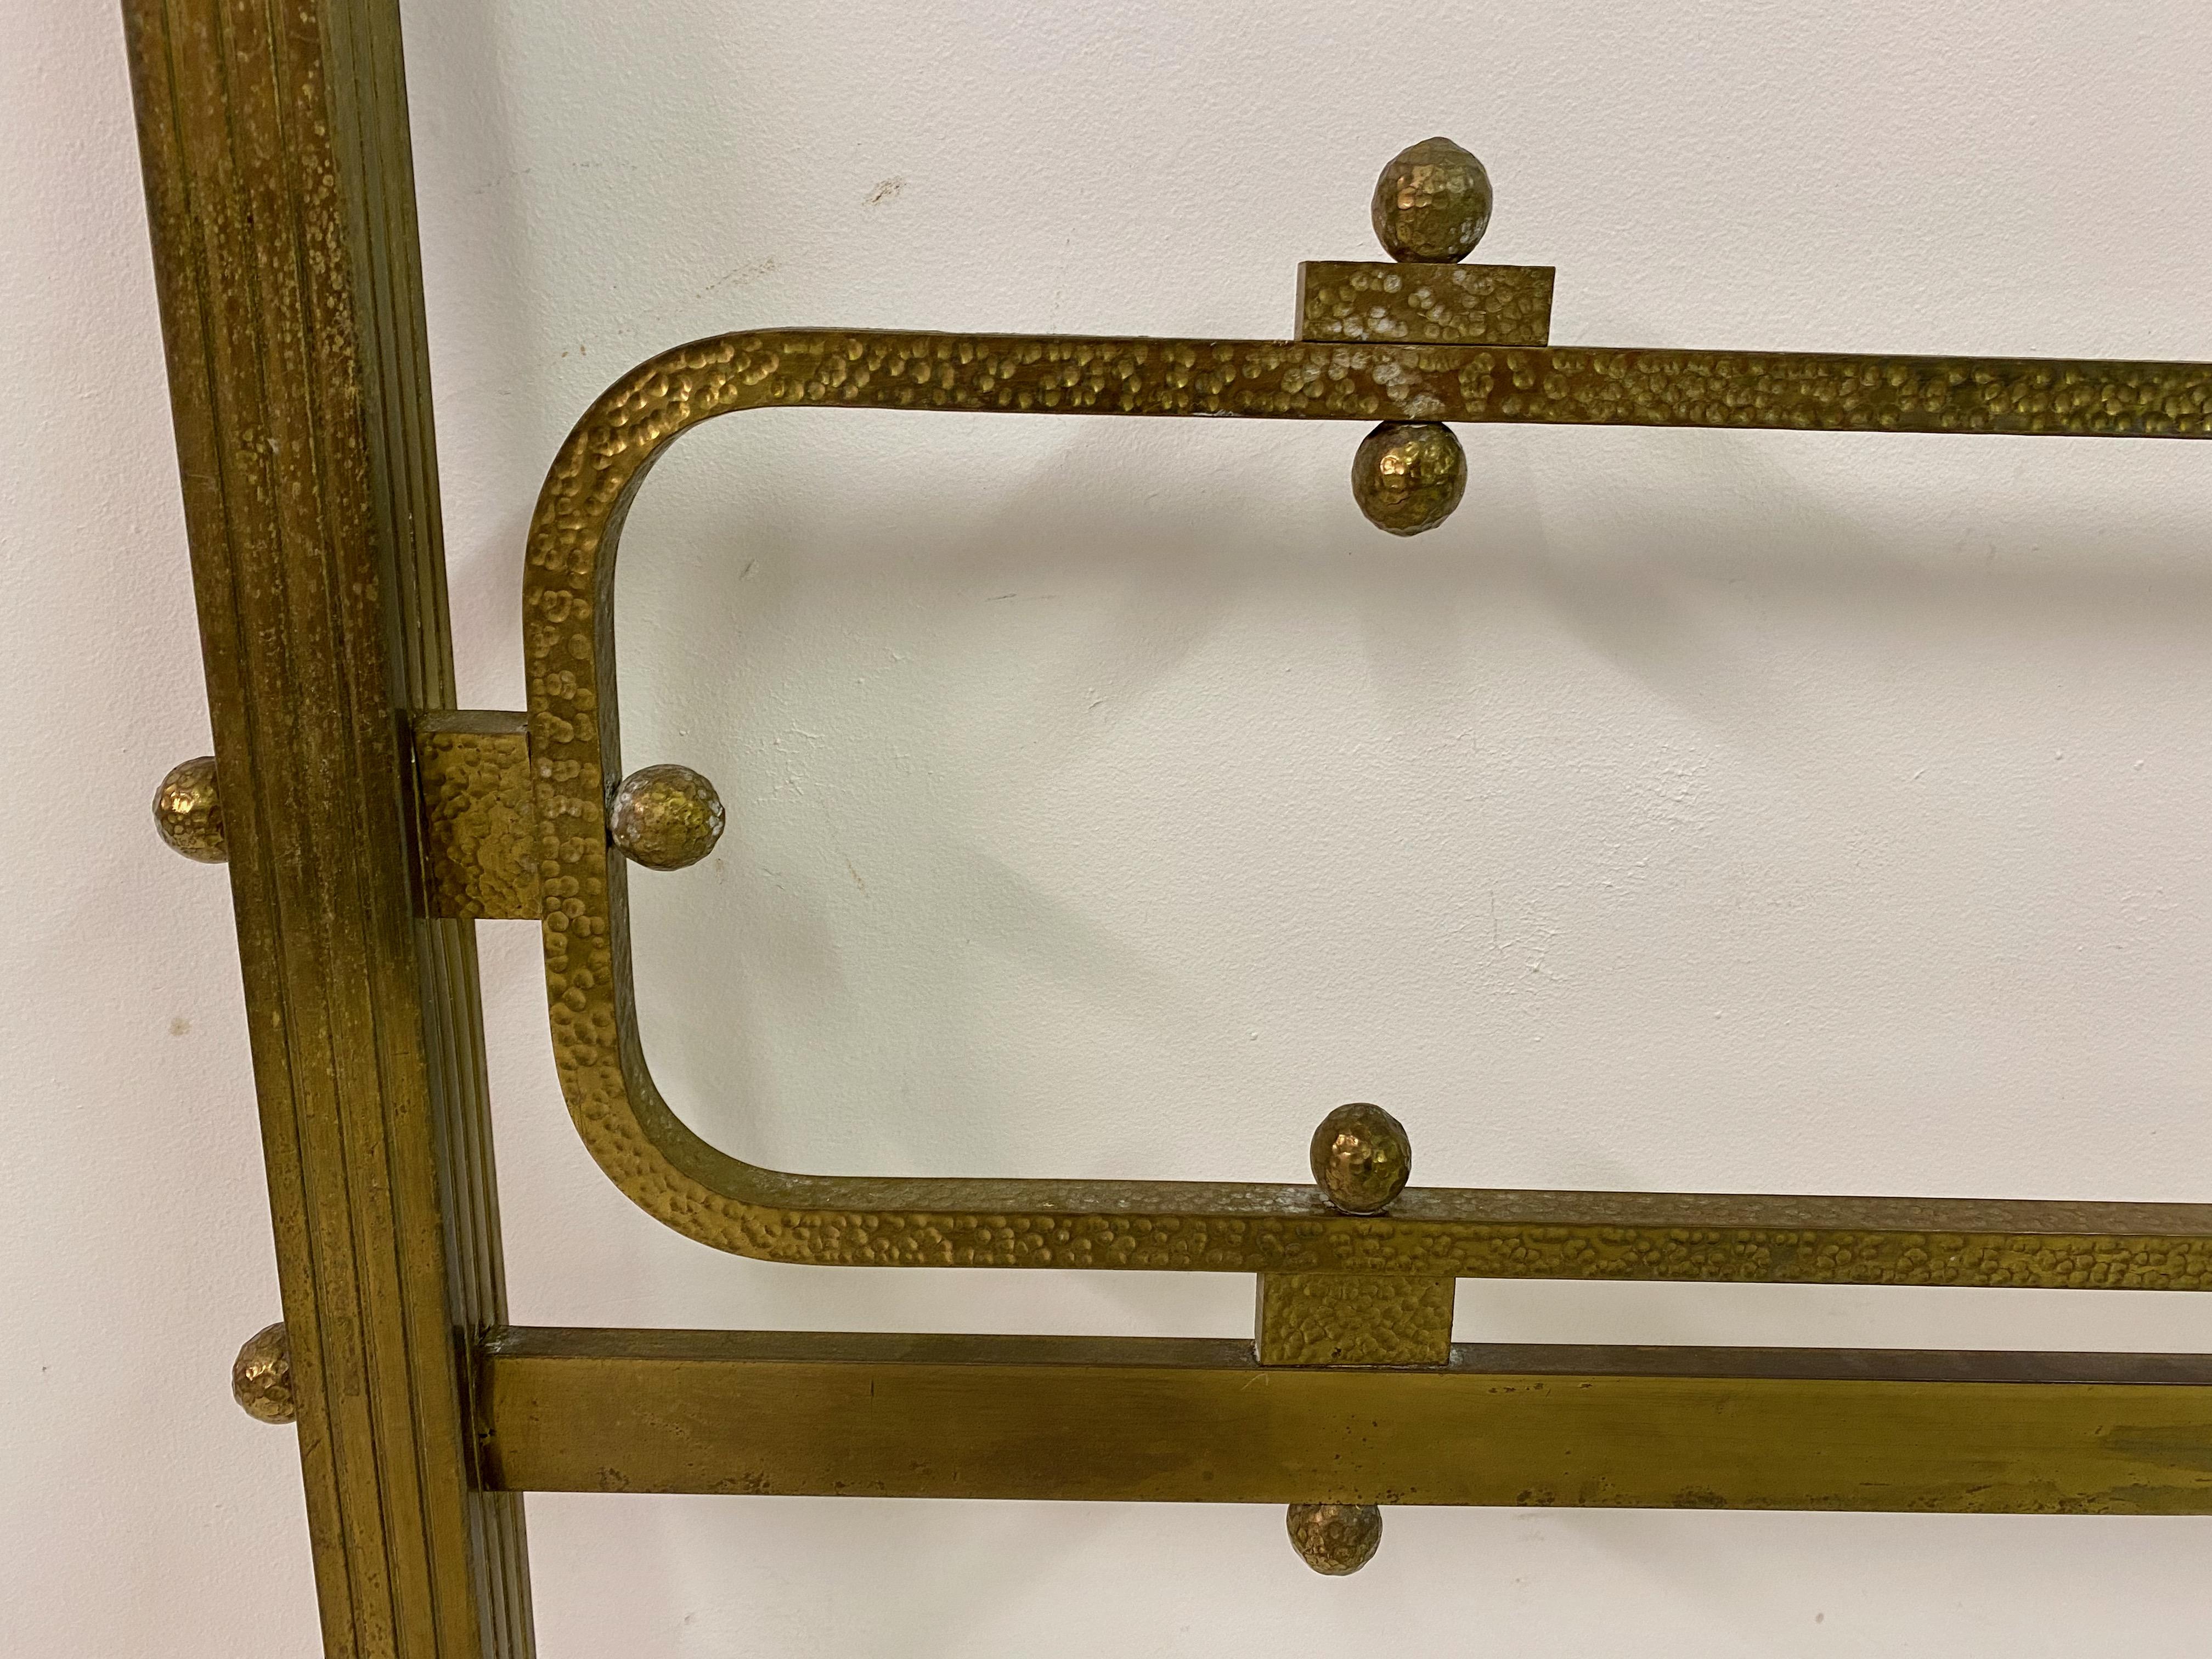 1970s Italian Brass Bed by Luciano Frigerio For Sale 2